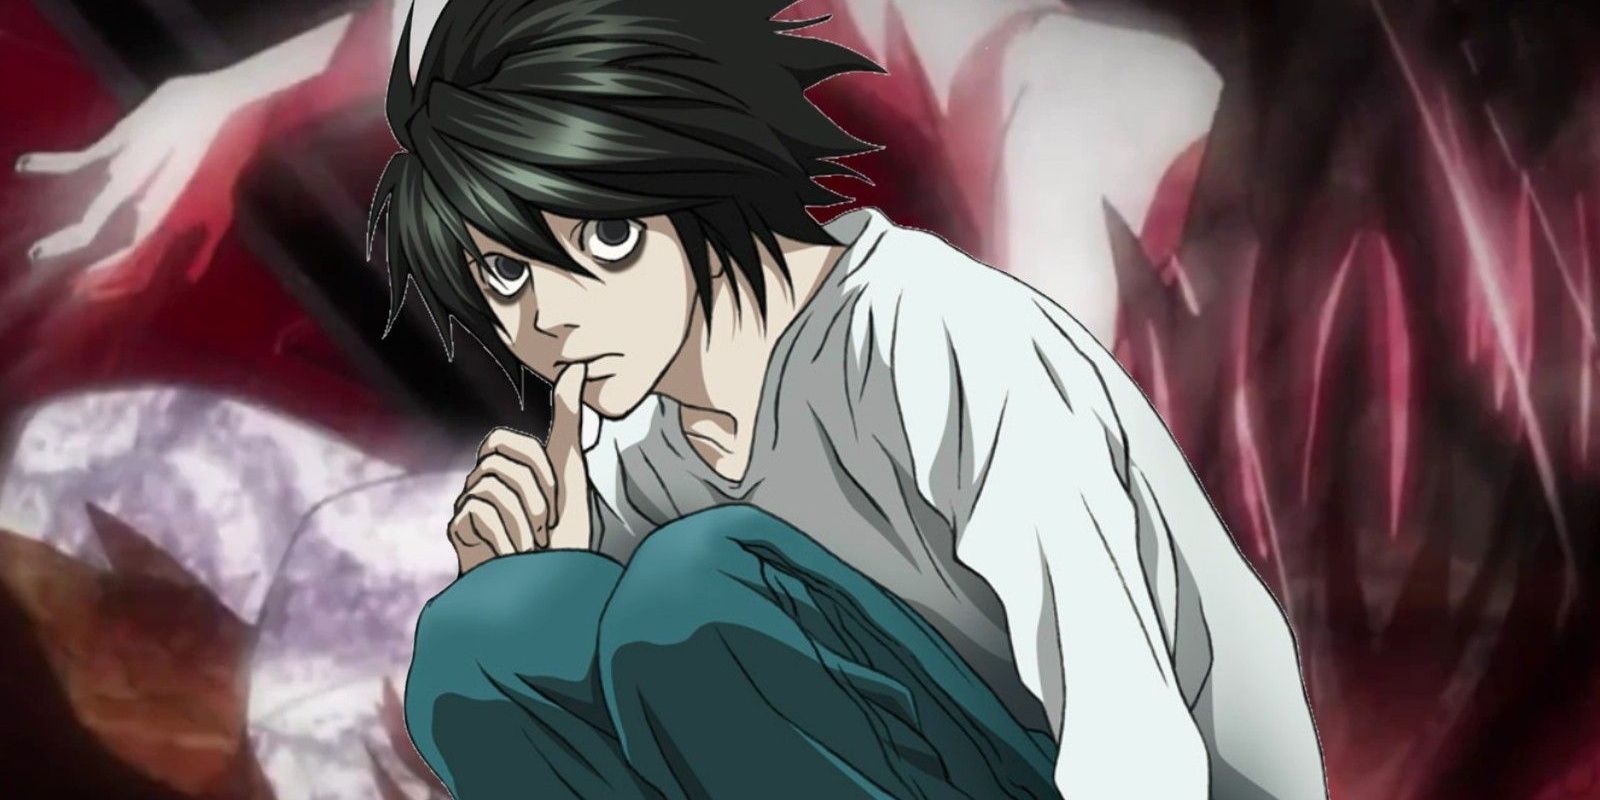 L Lawliet sitting and thinking of the Kira